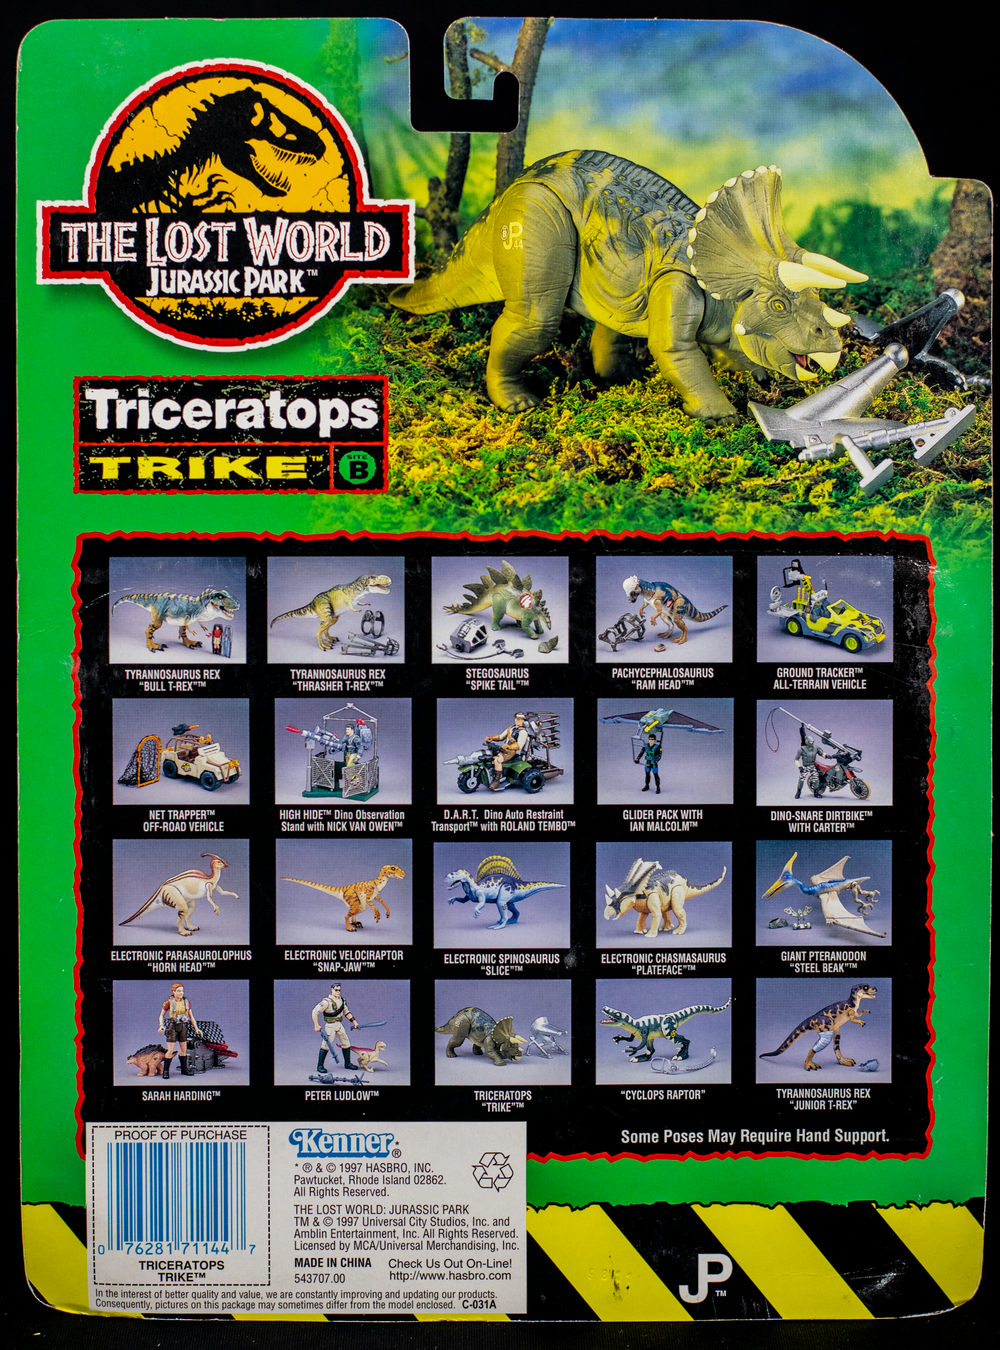 Jurassic Park: The Lost World Triceratops "Trike"